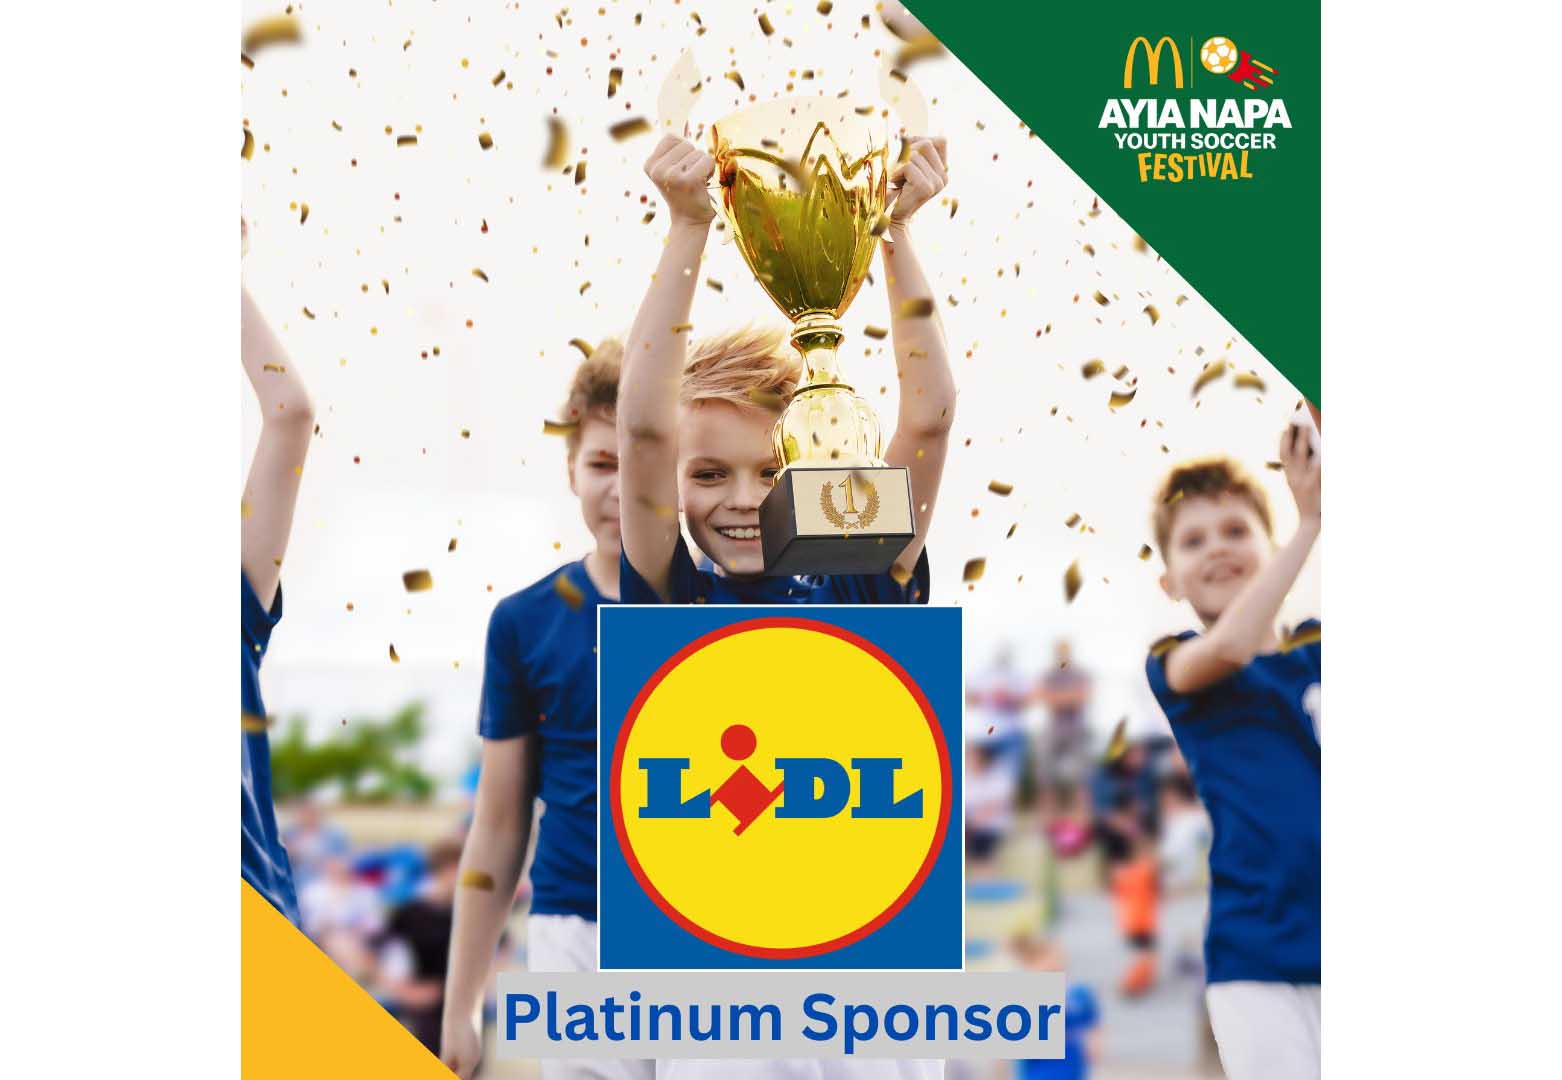 image Ayia Napa Youth Soccer Festival welcomes Lidl